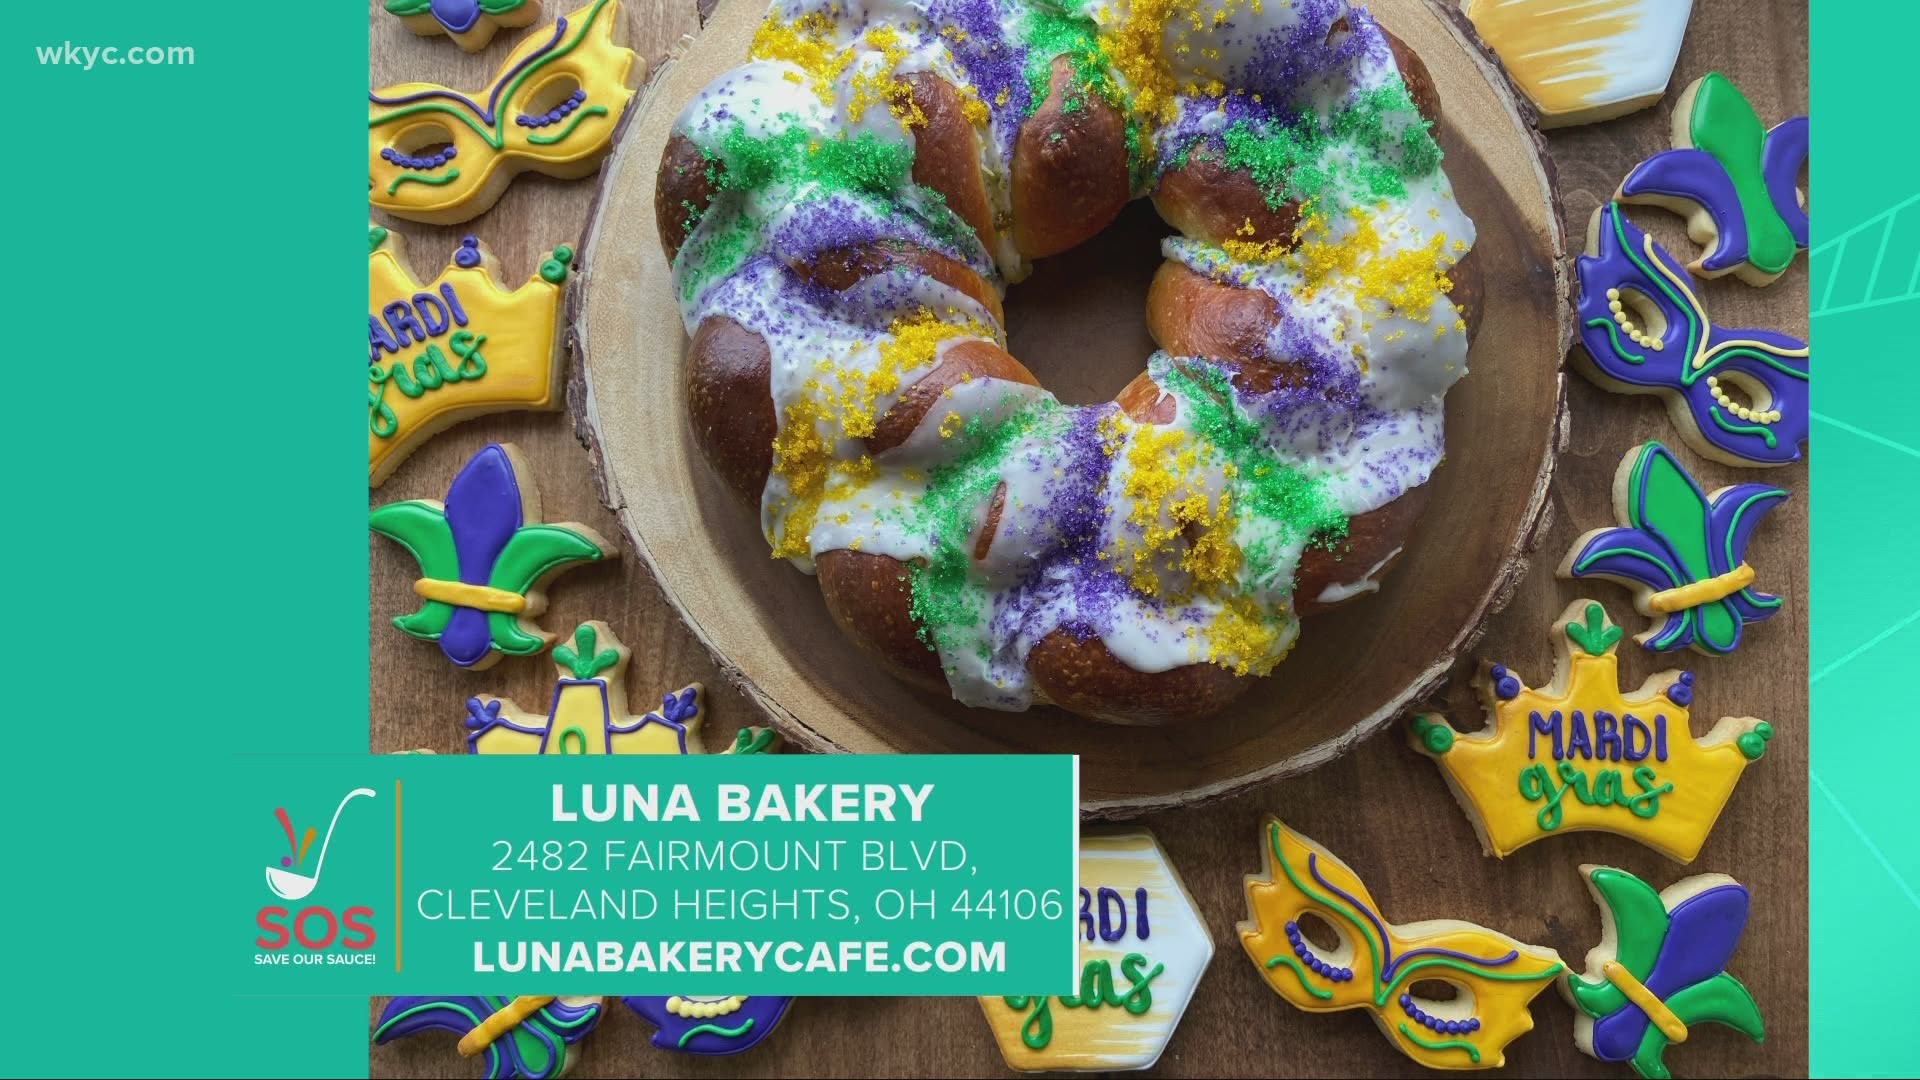 As we continue the 'Save our Sauce' campaign in support of Northeast Ohio restaurants during the COVID-19 pandemic, today we're highlighting Luna Bakery.